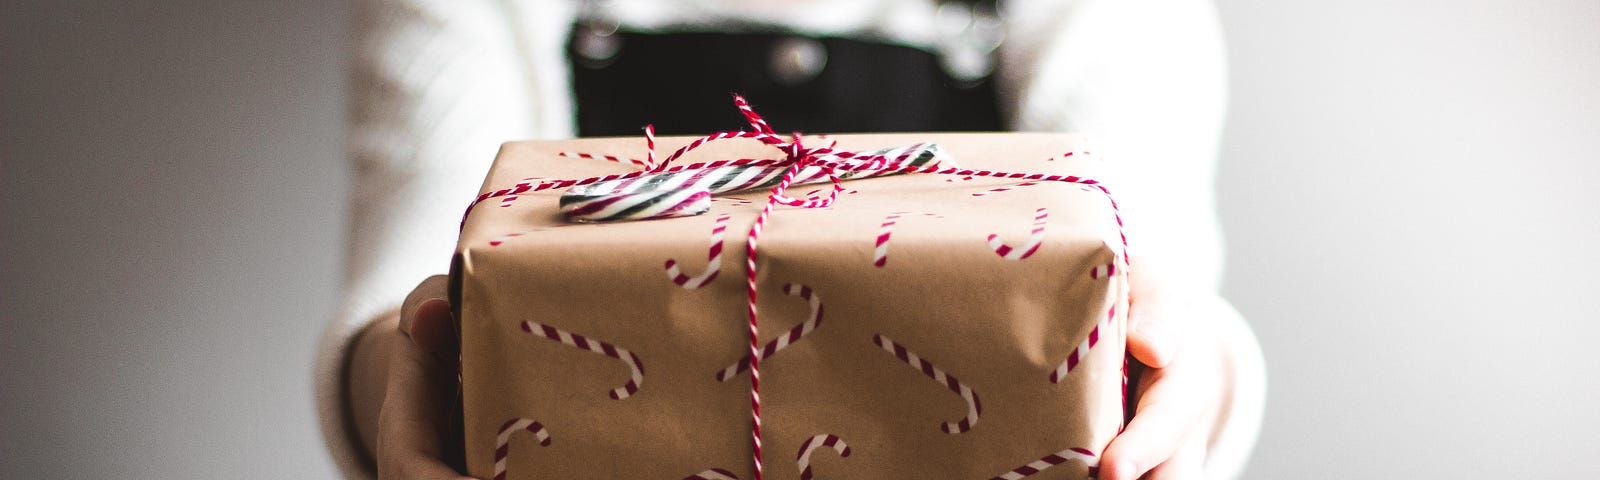 A woman dressed in a whiite shirt and black overalls hold out a small wrapped gift. The giftwrapping is brown with candy canes on it and a thin red and white ribbon wrapped around it.